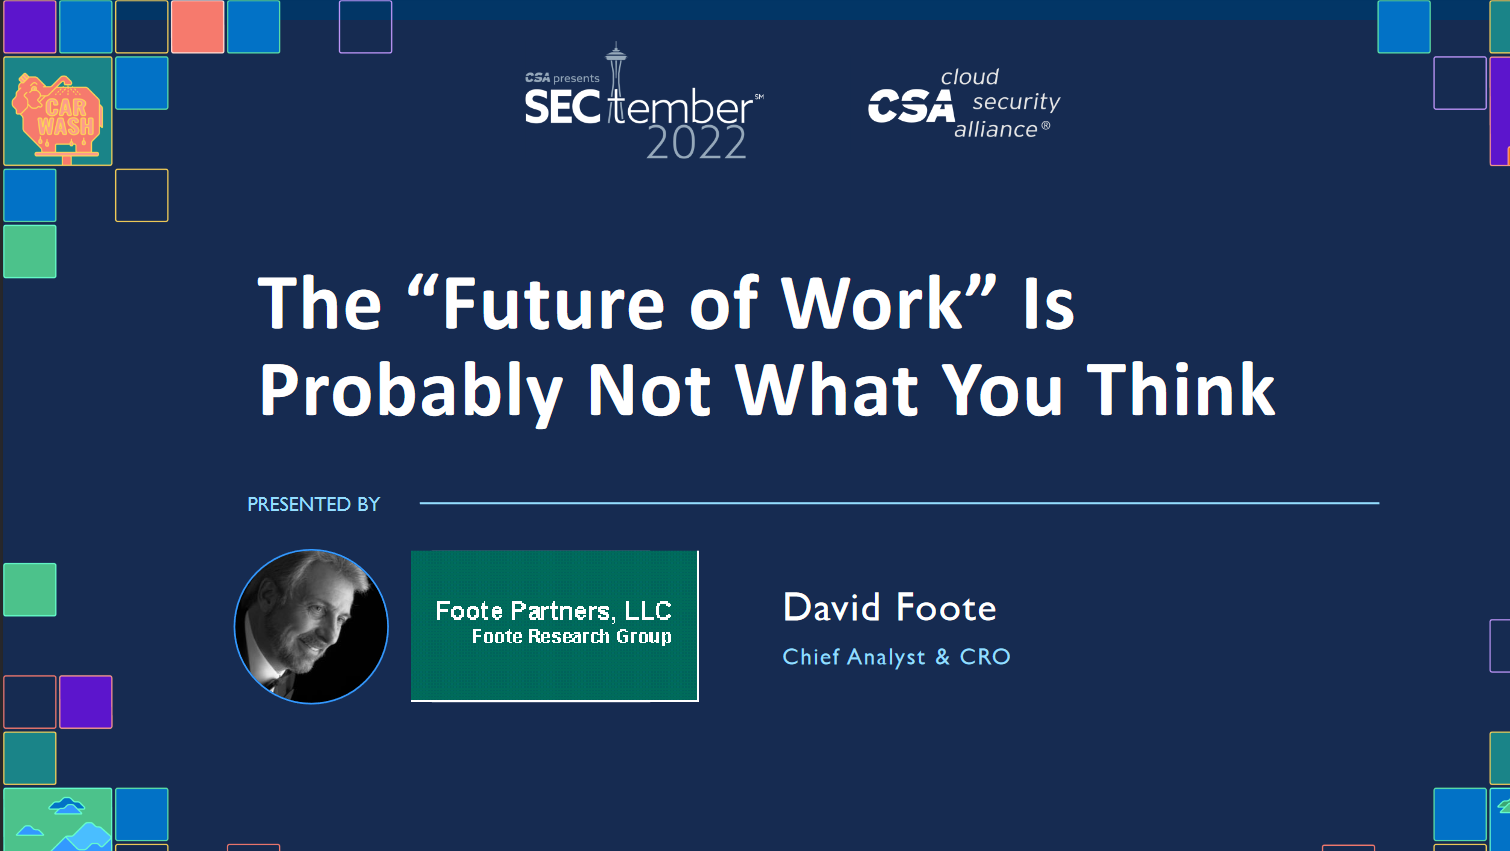 The Future of Work is Probably Not What You Think